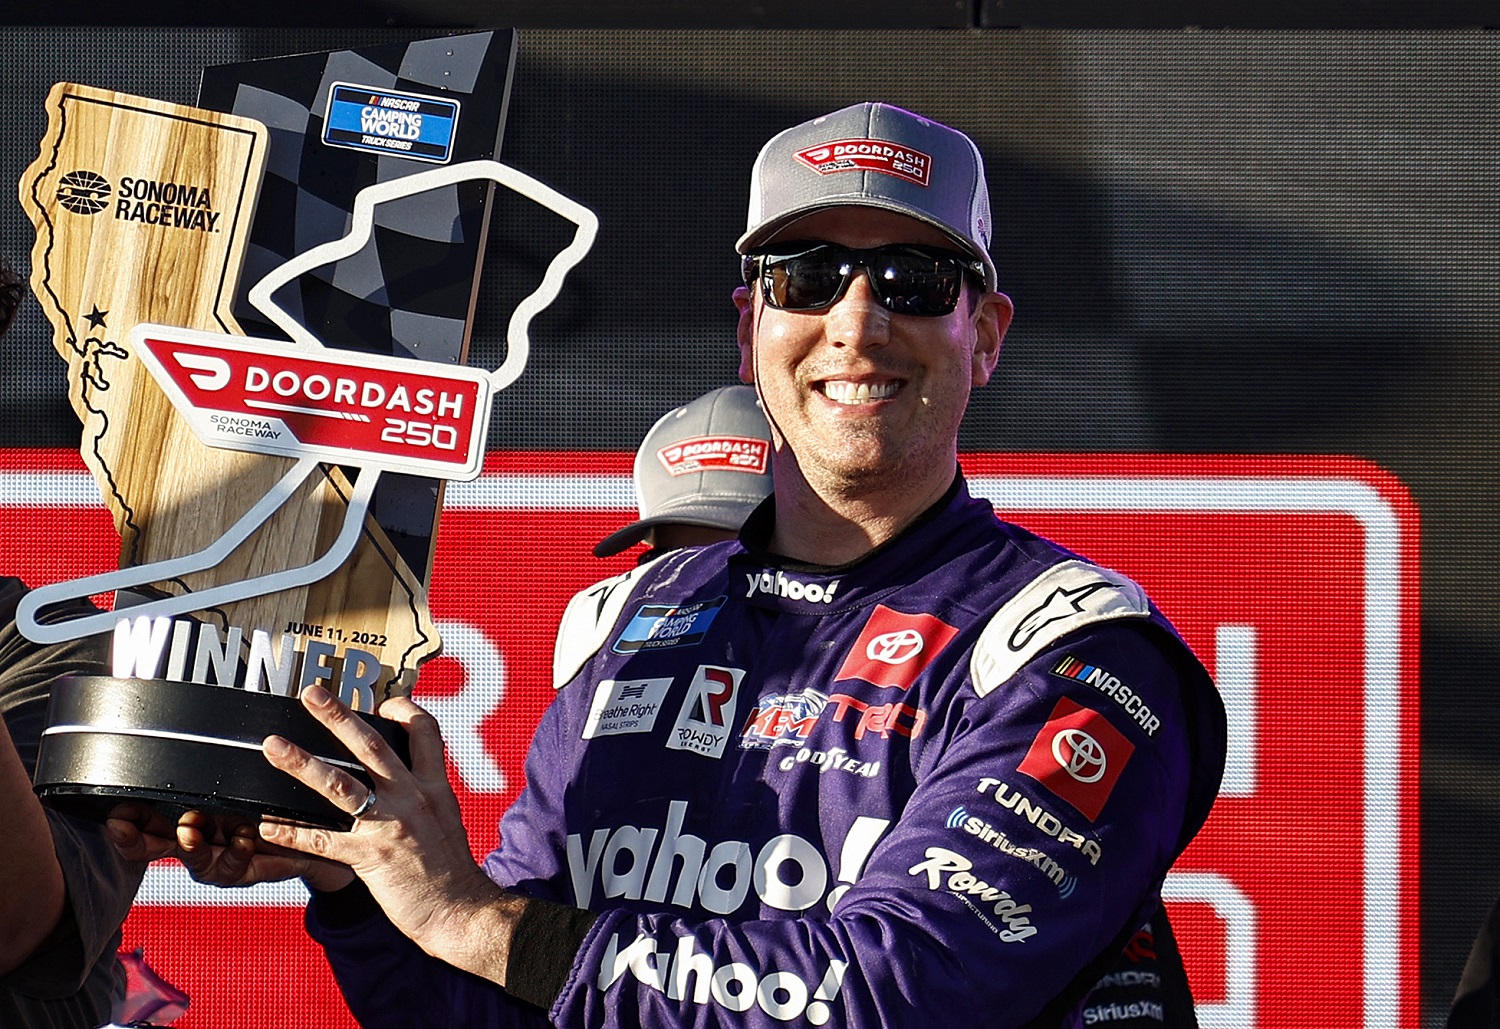 Kyle Busch celebrates in victory lane after winning the NASCAR Camping World Truck Series DoorDash 250 at Sonoma Raceway on June 11, 2022. | Chris Graythen/Getty Images